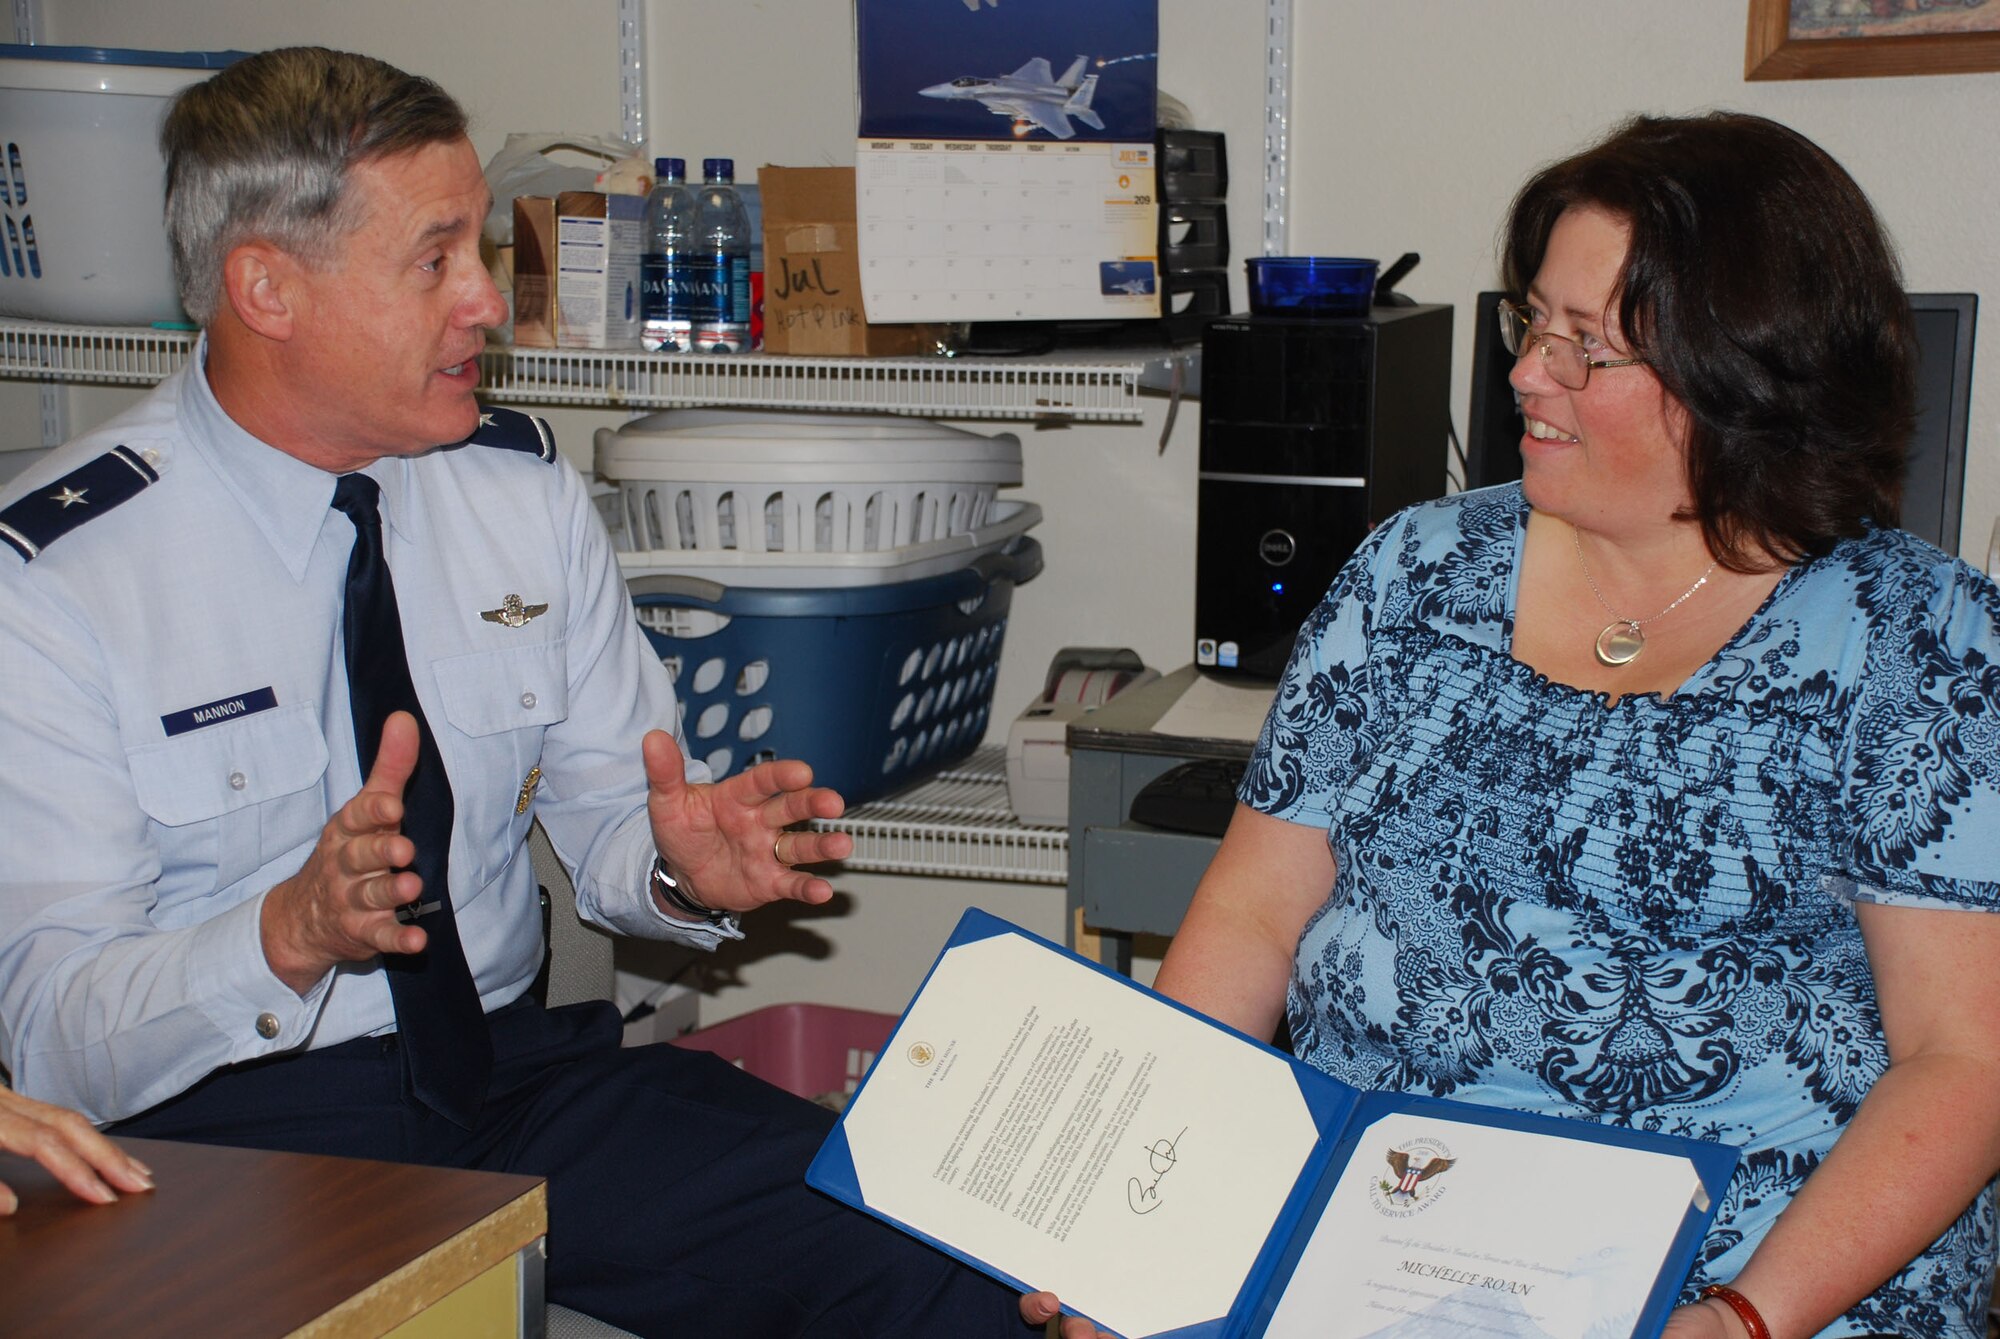 Brig. Gen. O.G. Mannon (left), 82nd Training Wing commander, talks to Michelle Roan, manager of Sheppard's Thrift Store, about her importance to helping out Sheppard families. Mrs. Roan was awarded the President's Volunteer Service Award July 1. (U.S. Air Force photo/John Ingle)